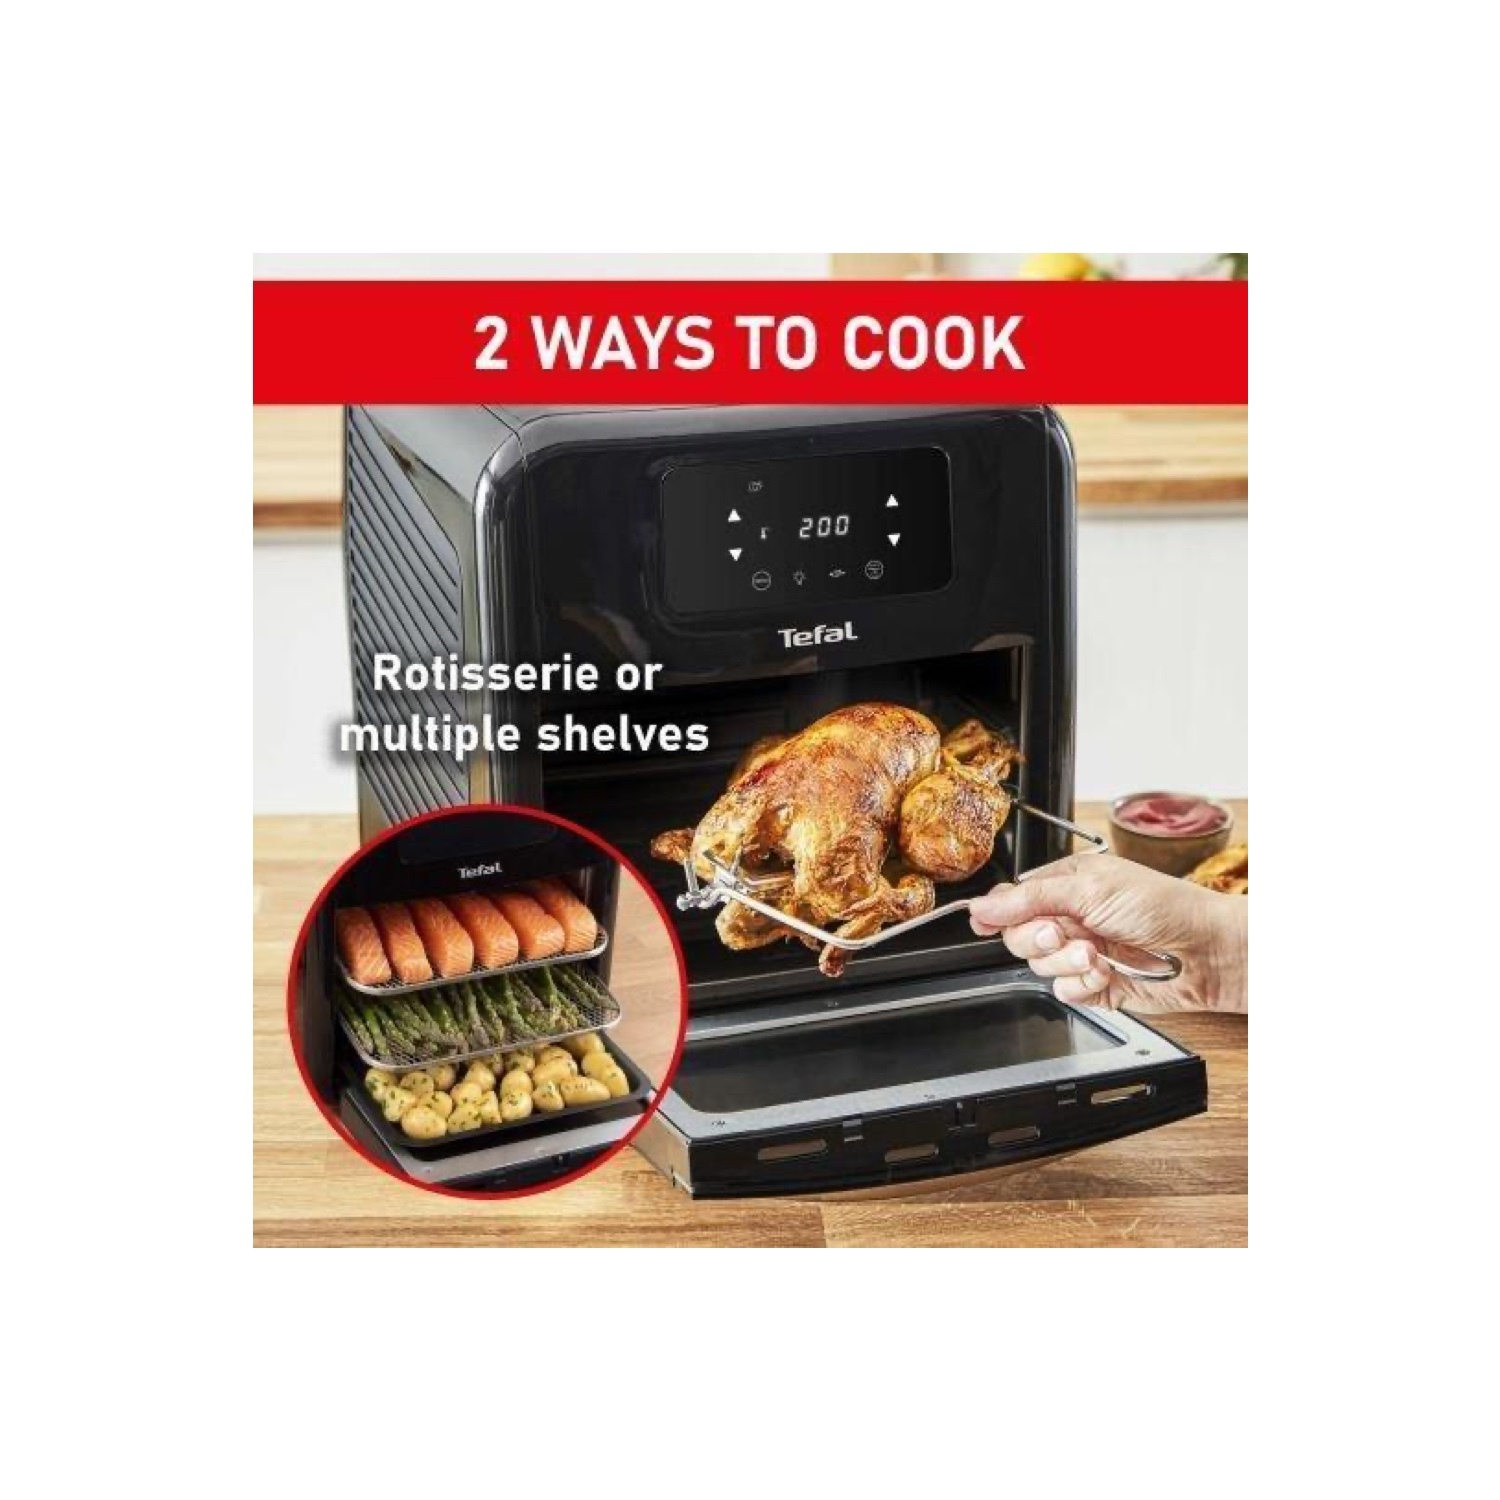 Moulinex: presents the new Easy Fry Oven & Grill